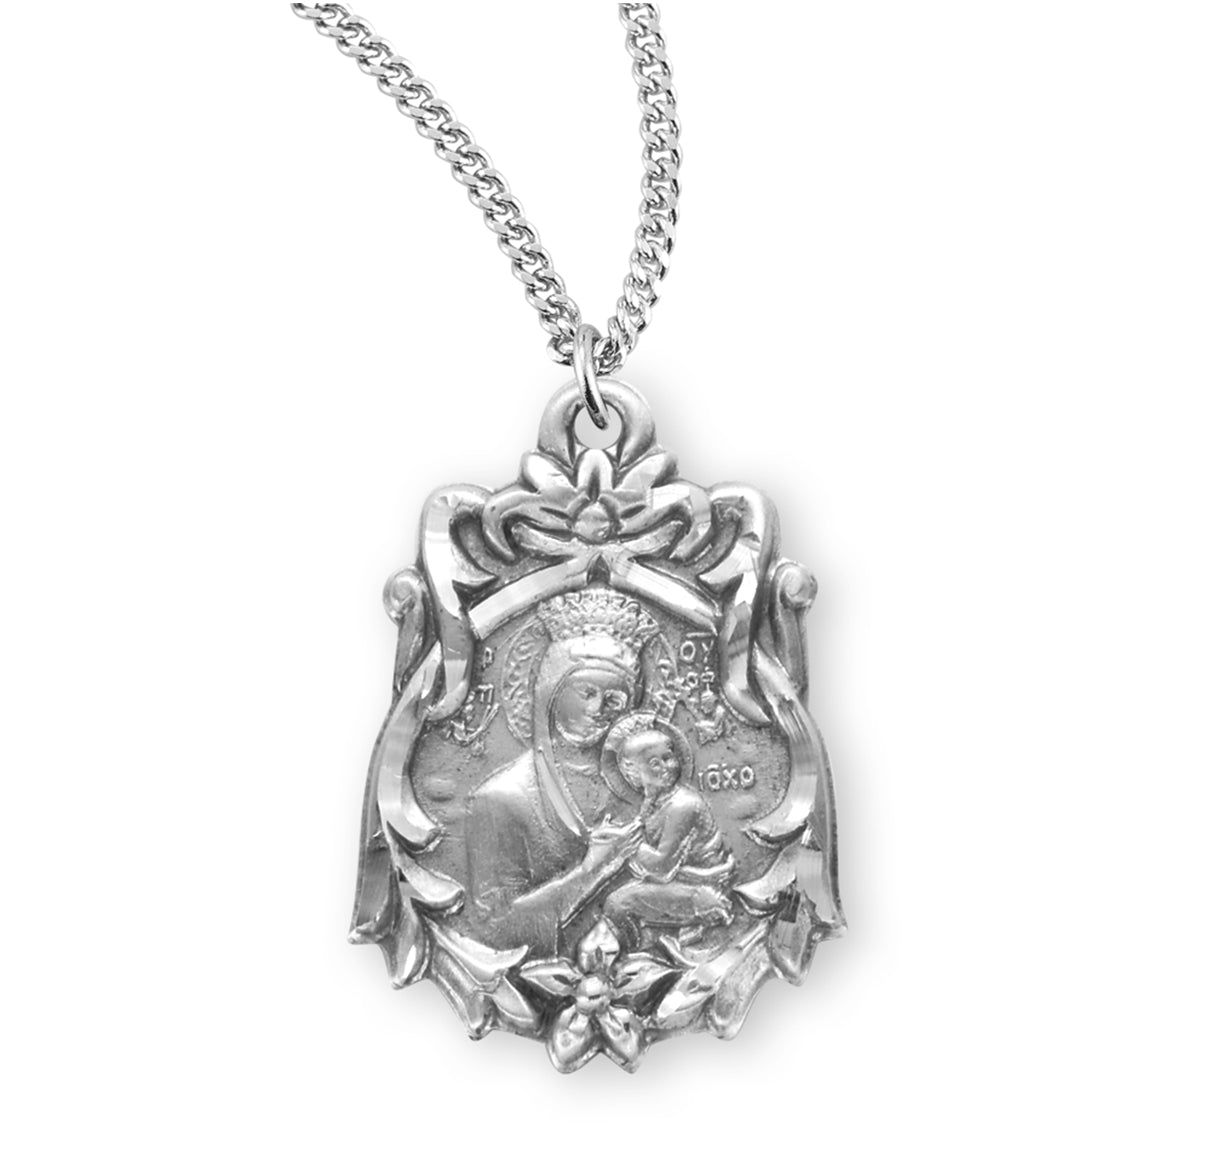 Our Lady of Perpetual Help Sterling Silver Medal